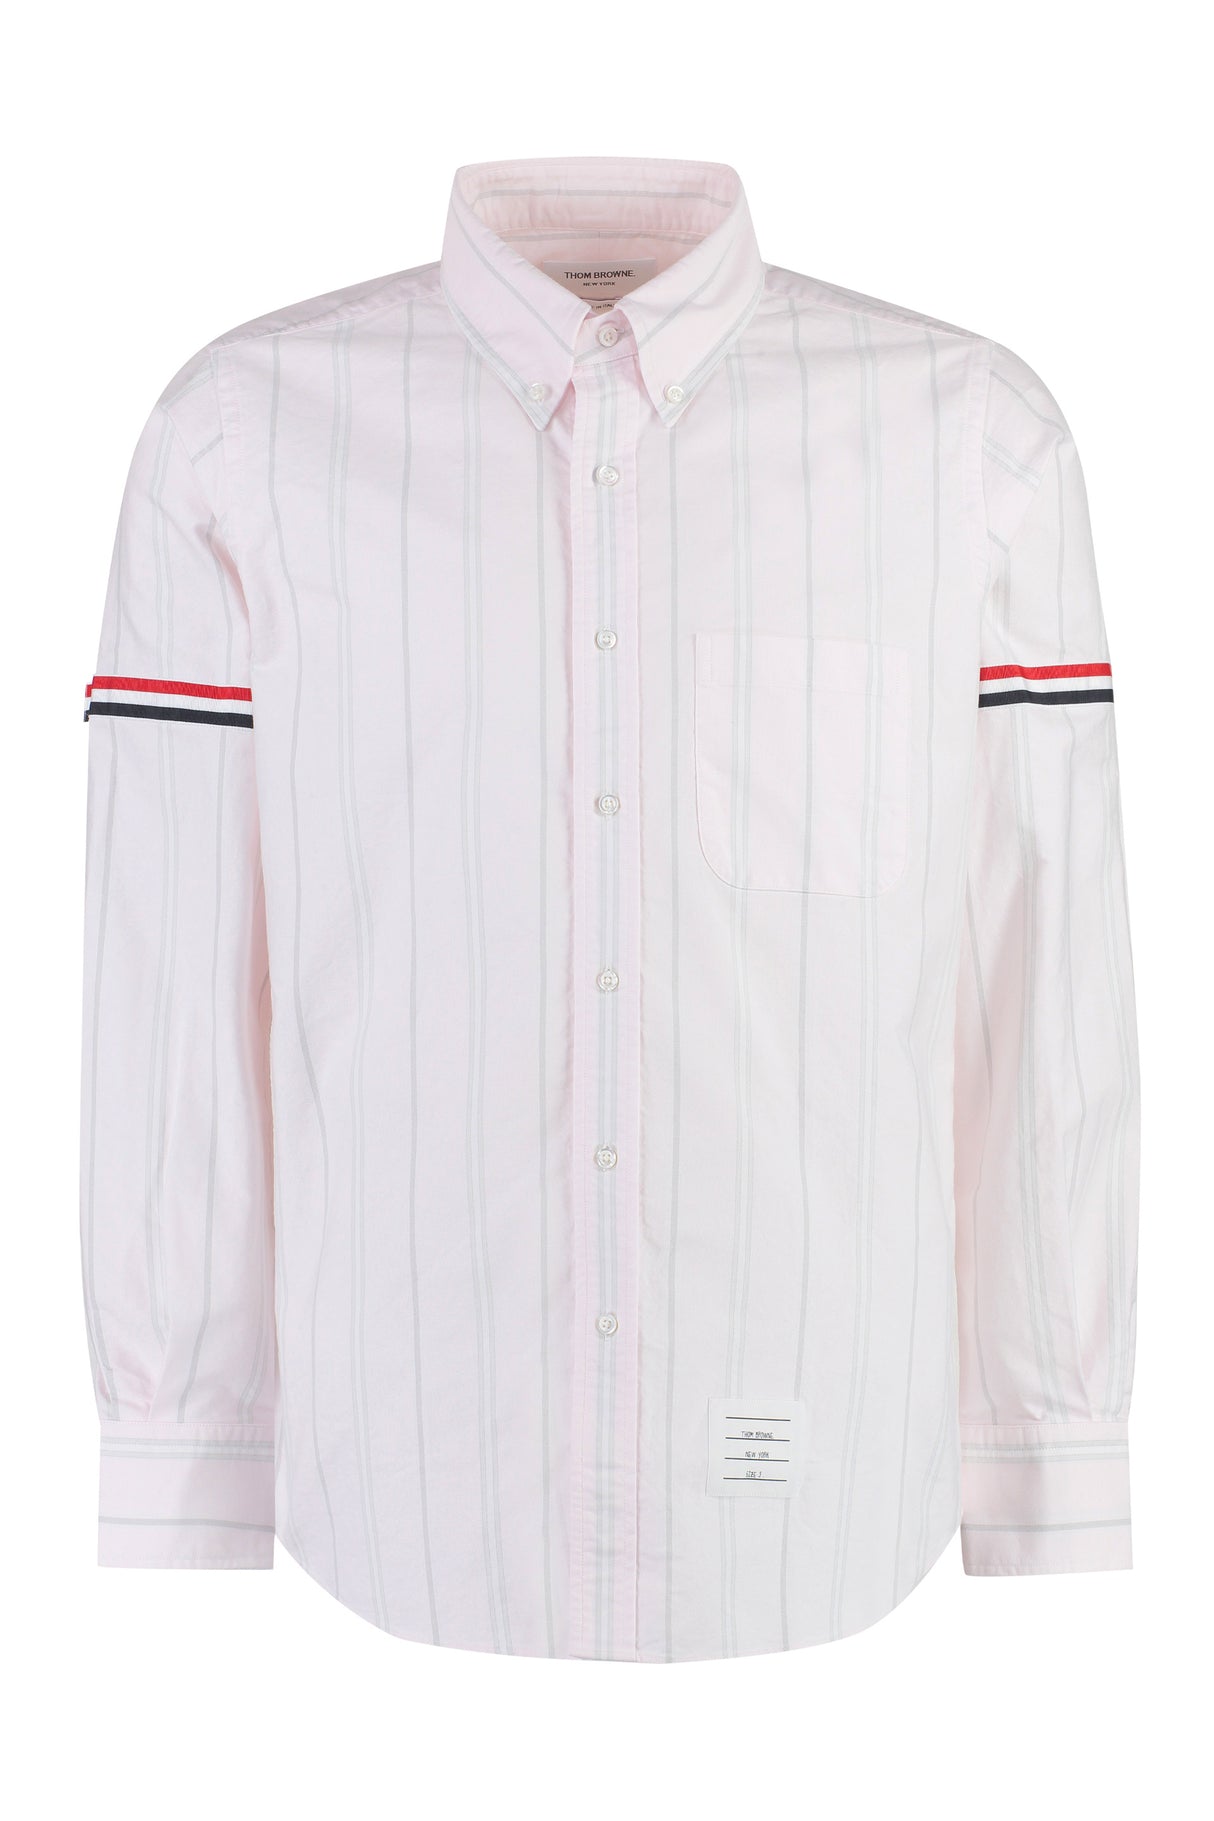 Tricolor Striped Cotton Shirt for Men - FW23 Collection